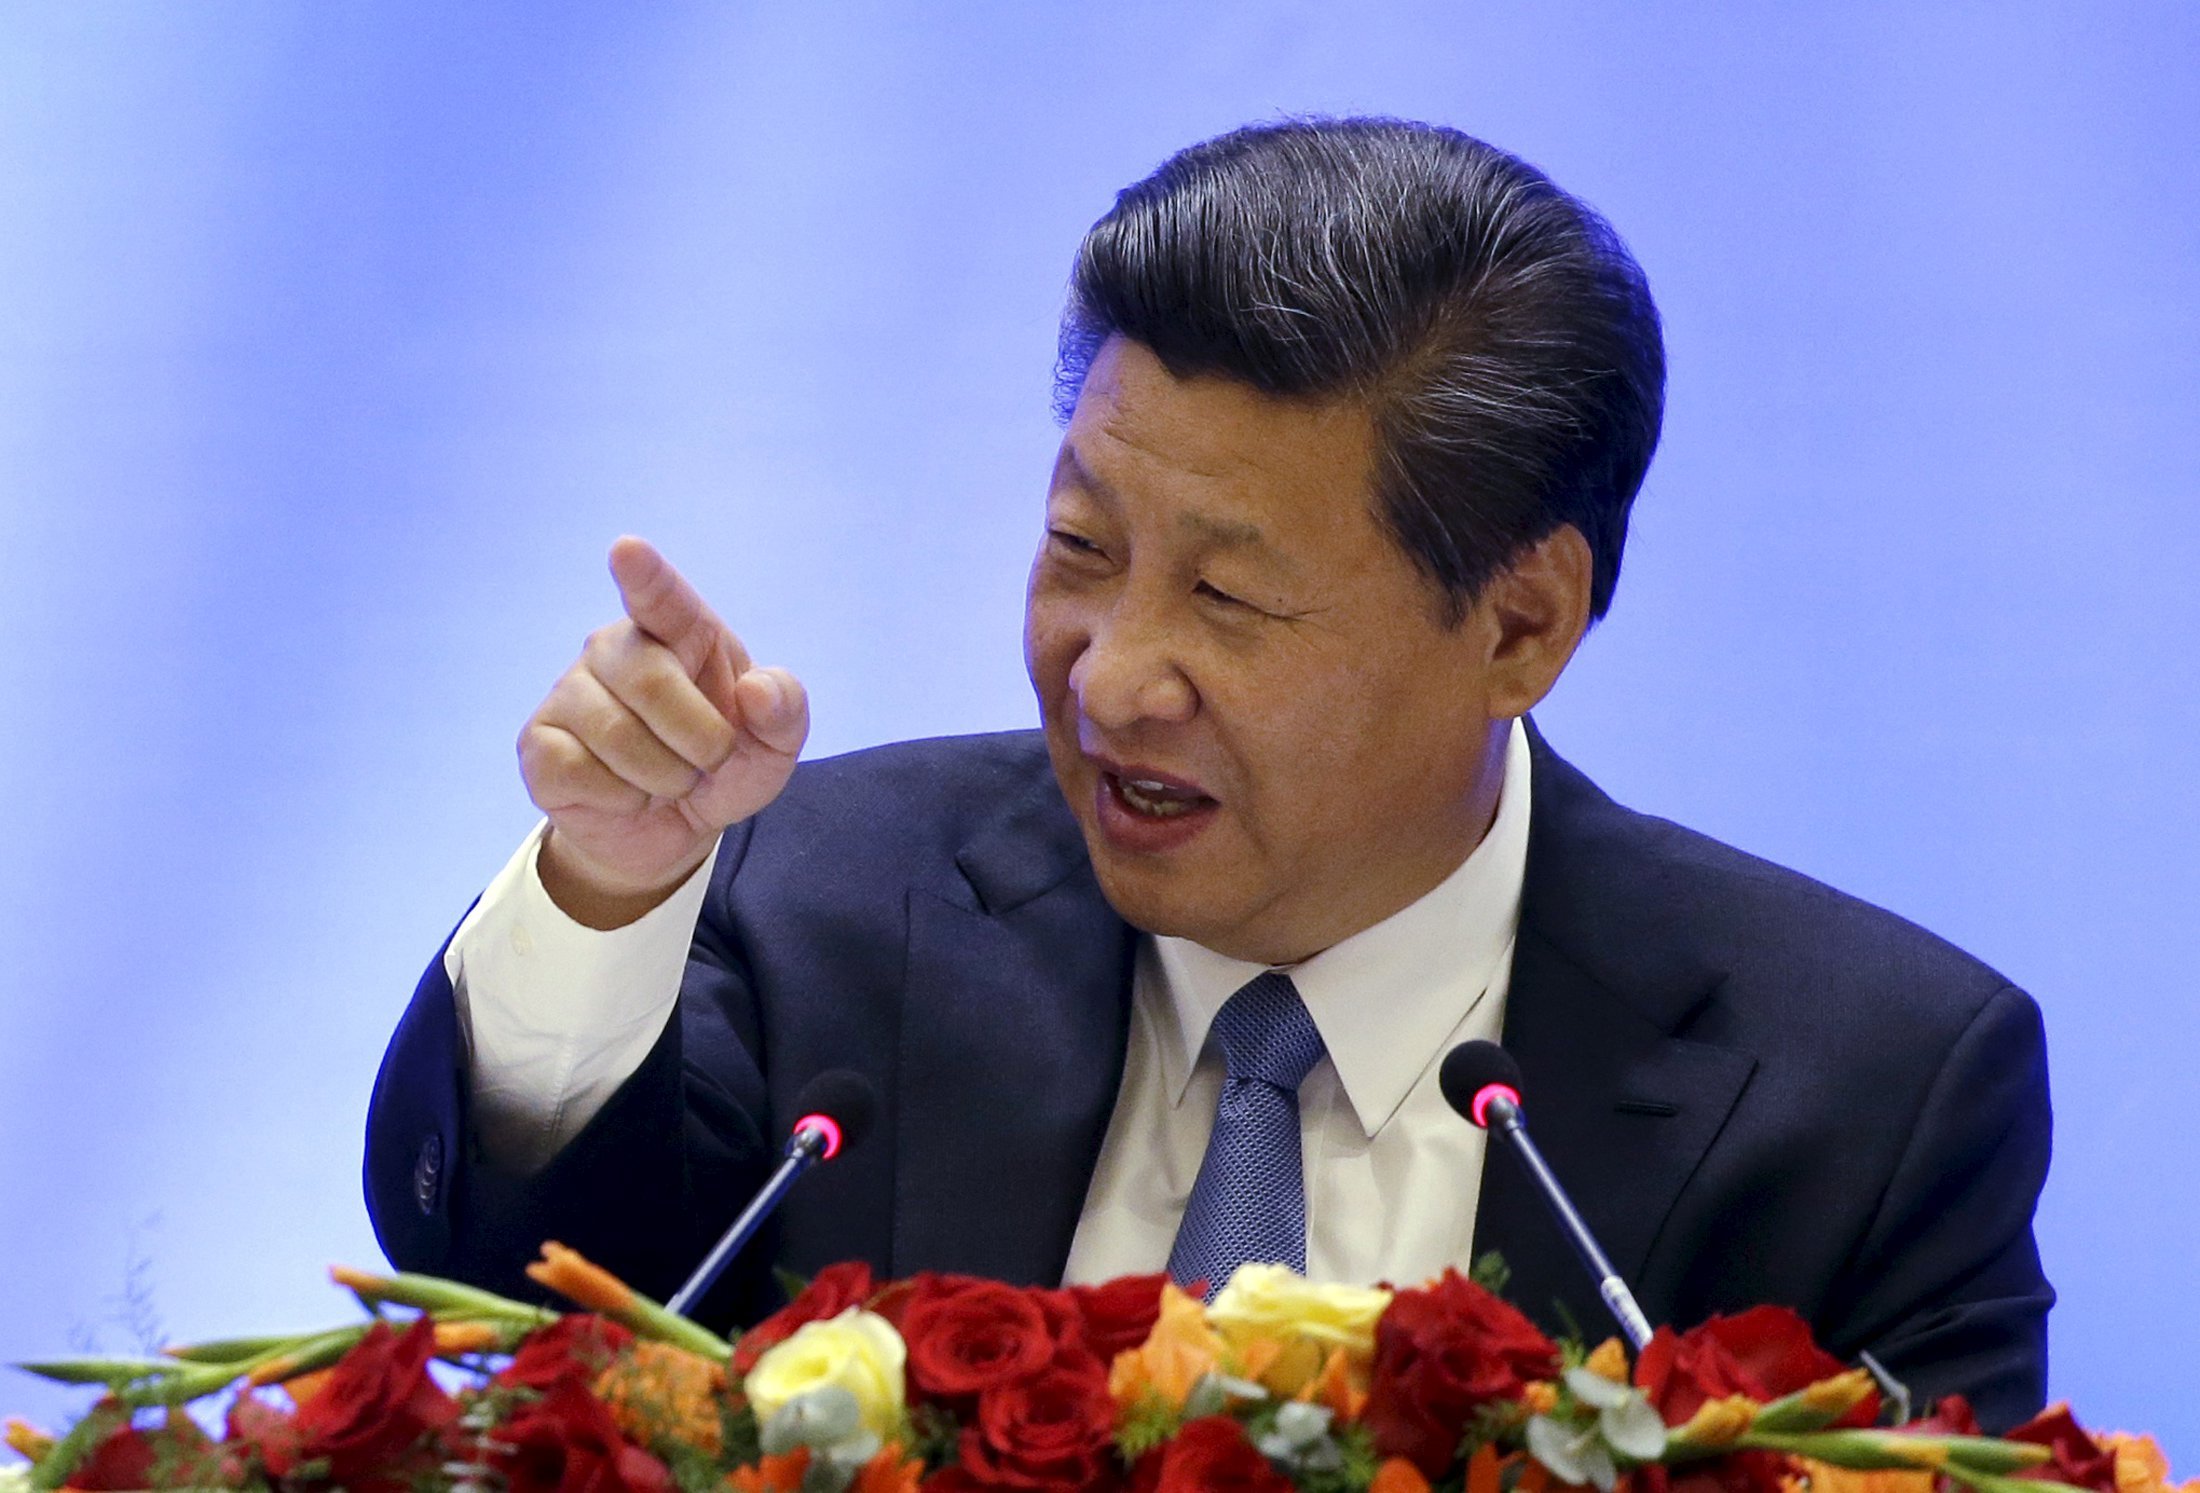 Chinese President Xi Jinping speaks at the China-US CEO roundtable discussion in Seattle last week. Photo: Reuters